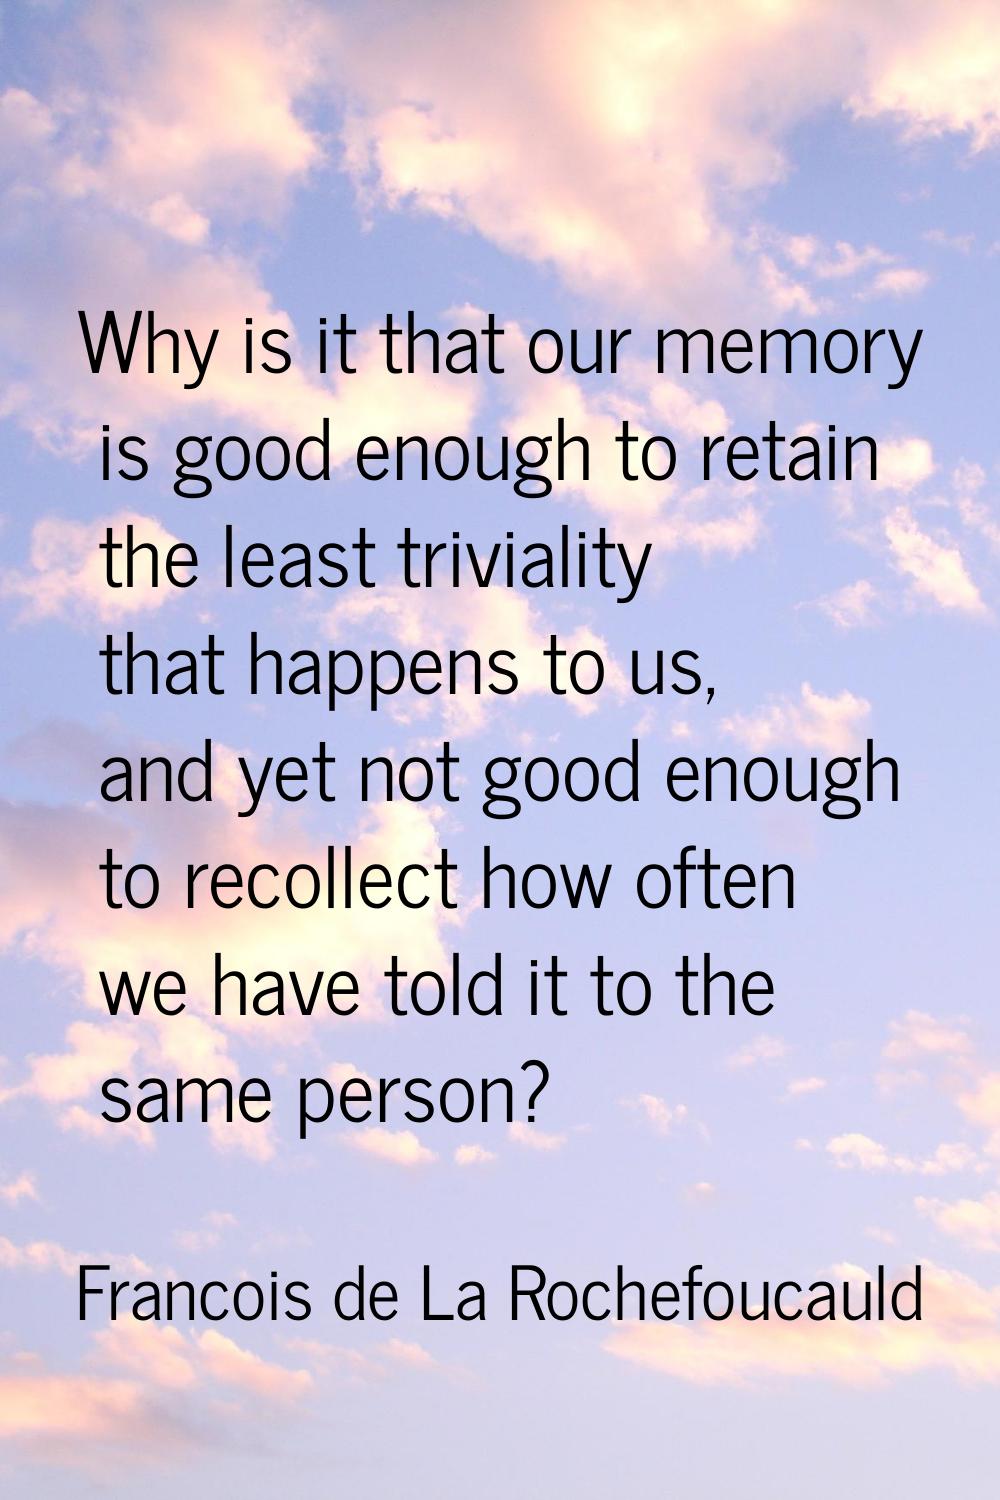 Why is it that our memory is good enough to retain the least triviality that happens to us, and yet